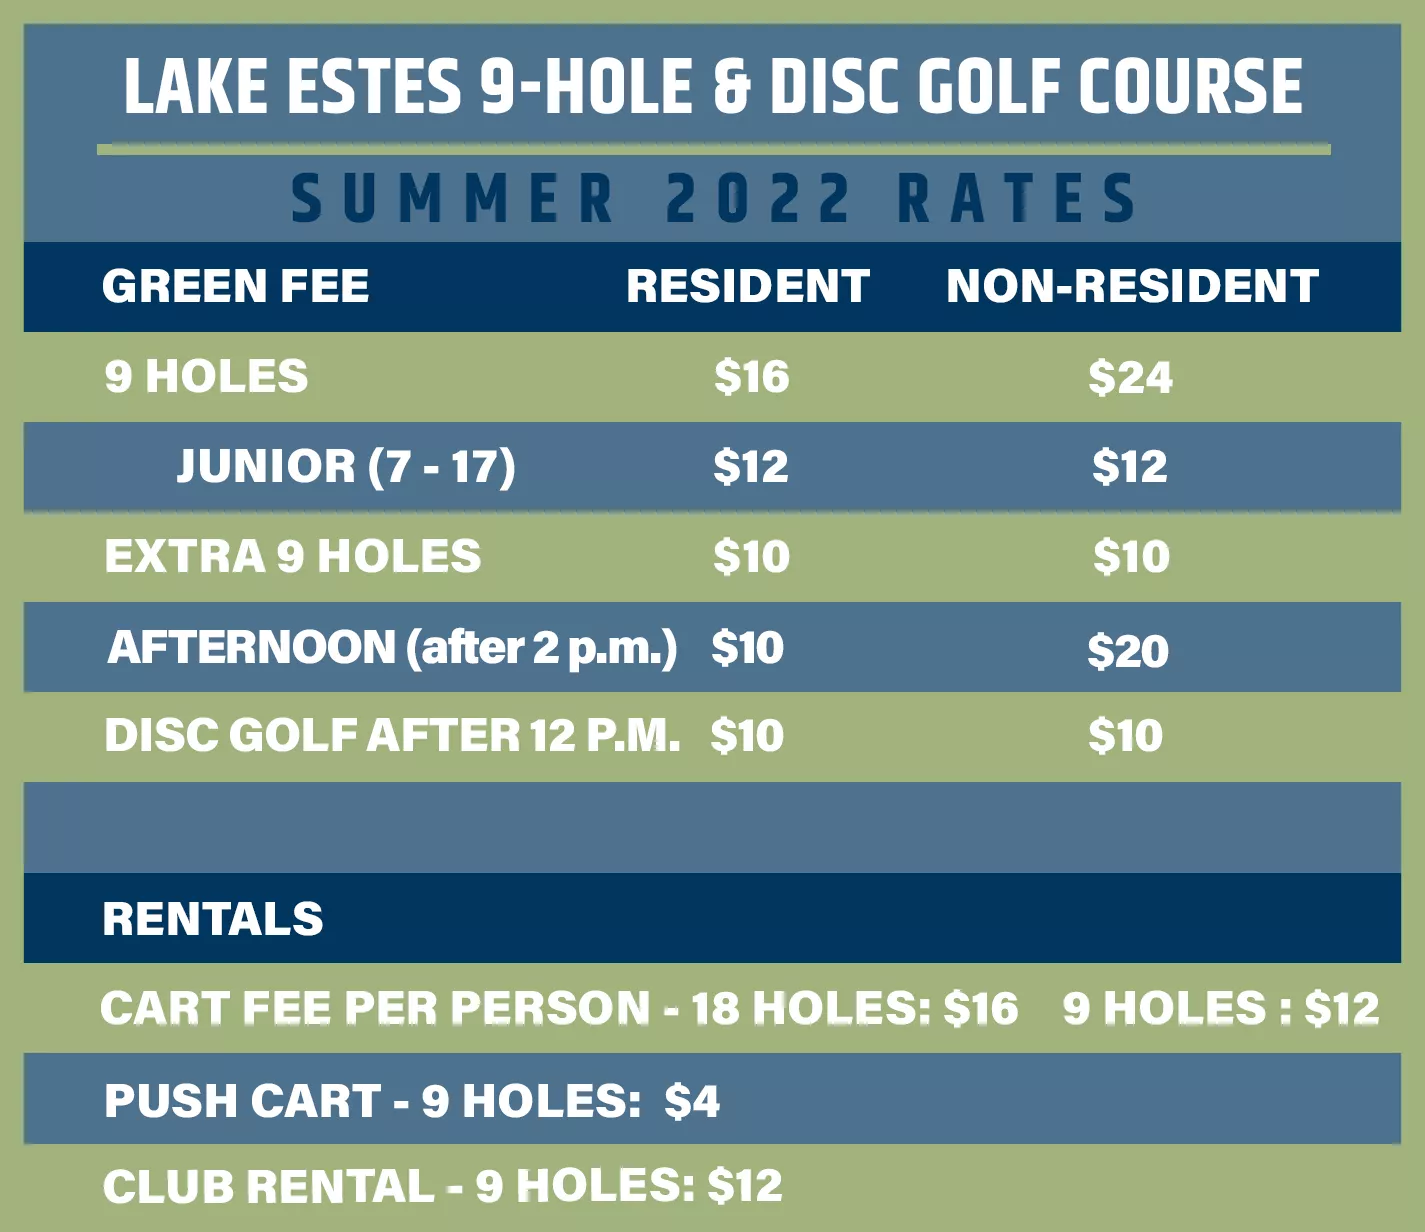 Summer 2022 Rates for the 9-Hole and Disc Golf Course